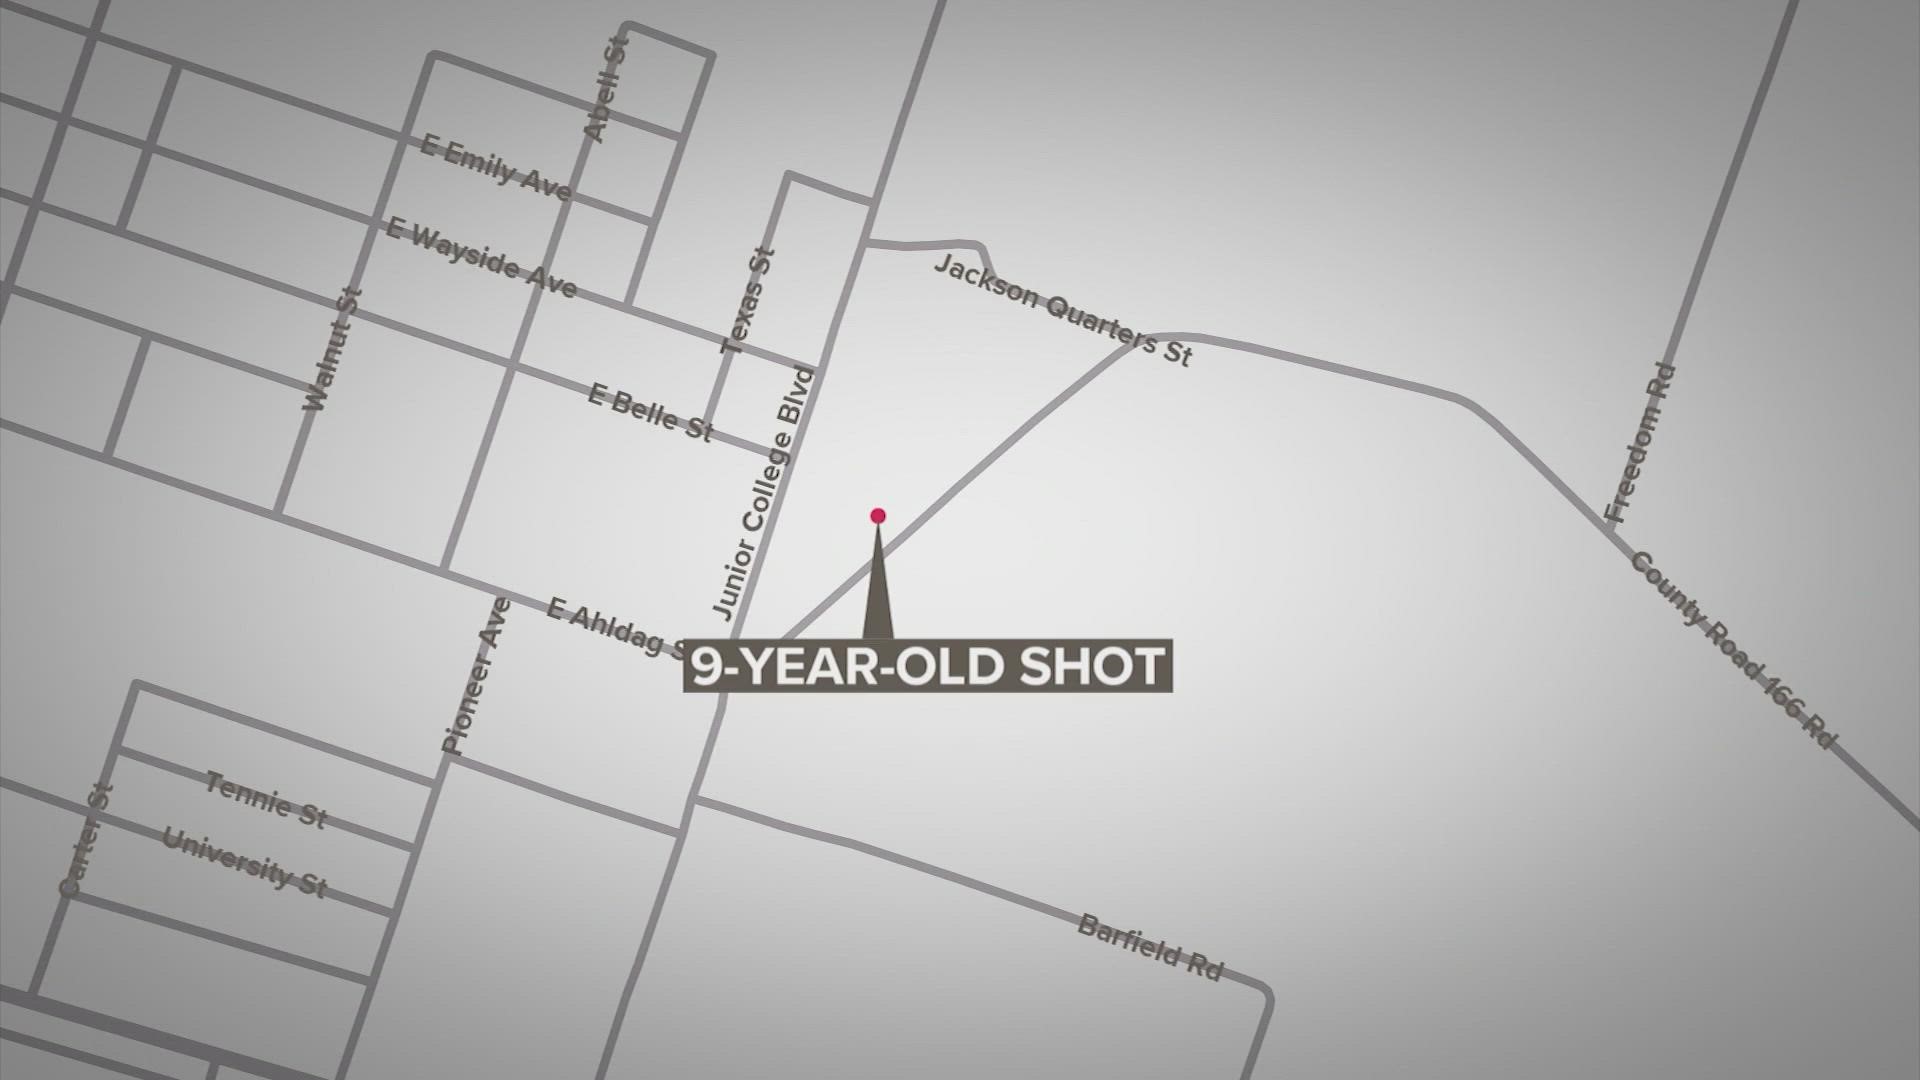 Police said an 18-year-old man was involved in a shootout and the 9-year-old boy was an "unintended victim."